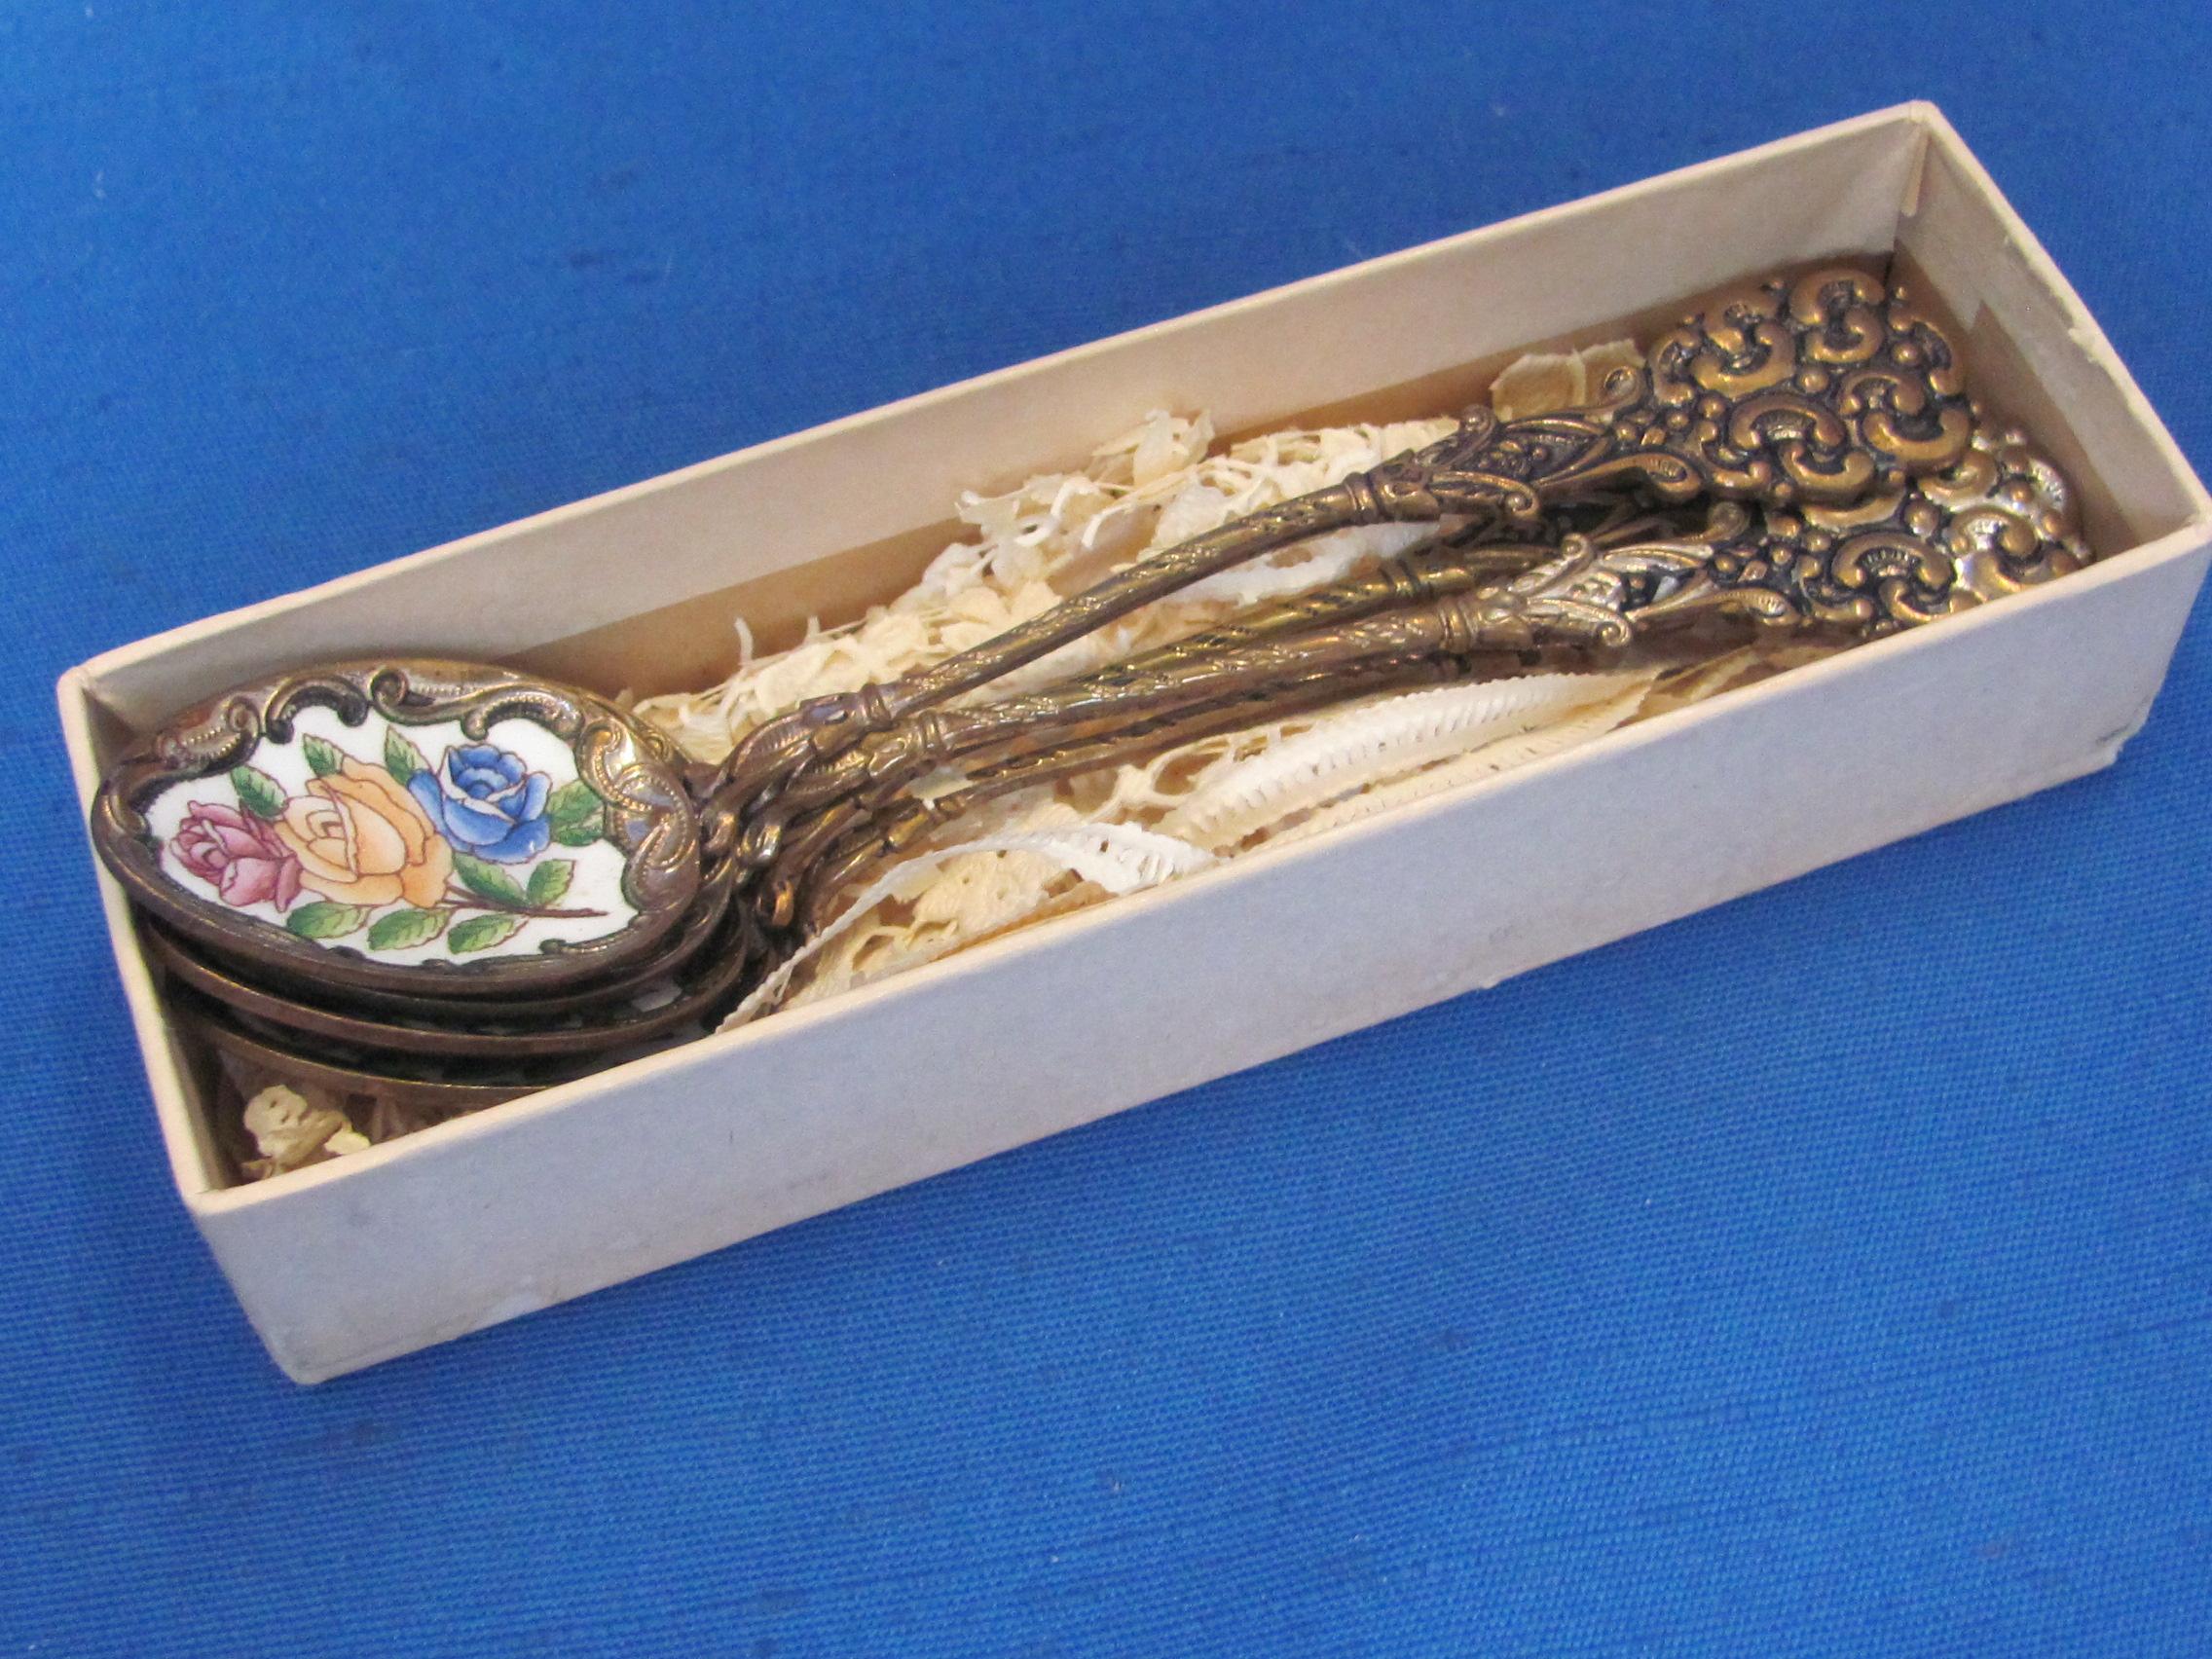 Set of 4 Decorative Spoons with Enamel Floral Bowls – 4 7/8” long – In box marked “Simpson's”